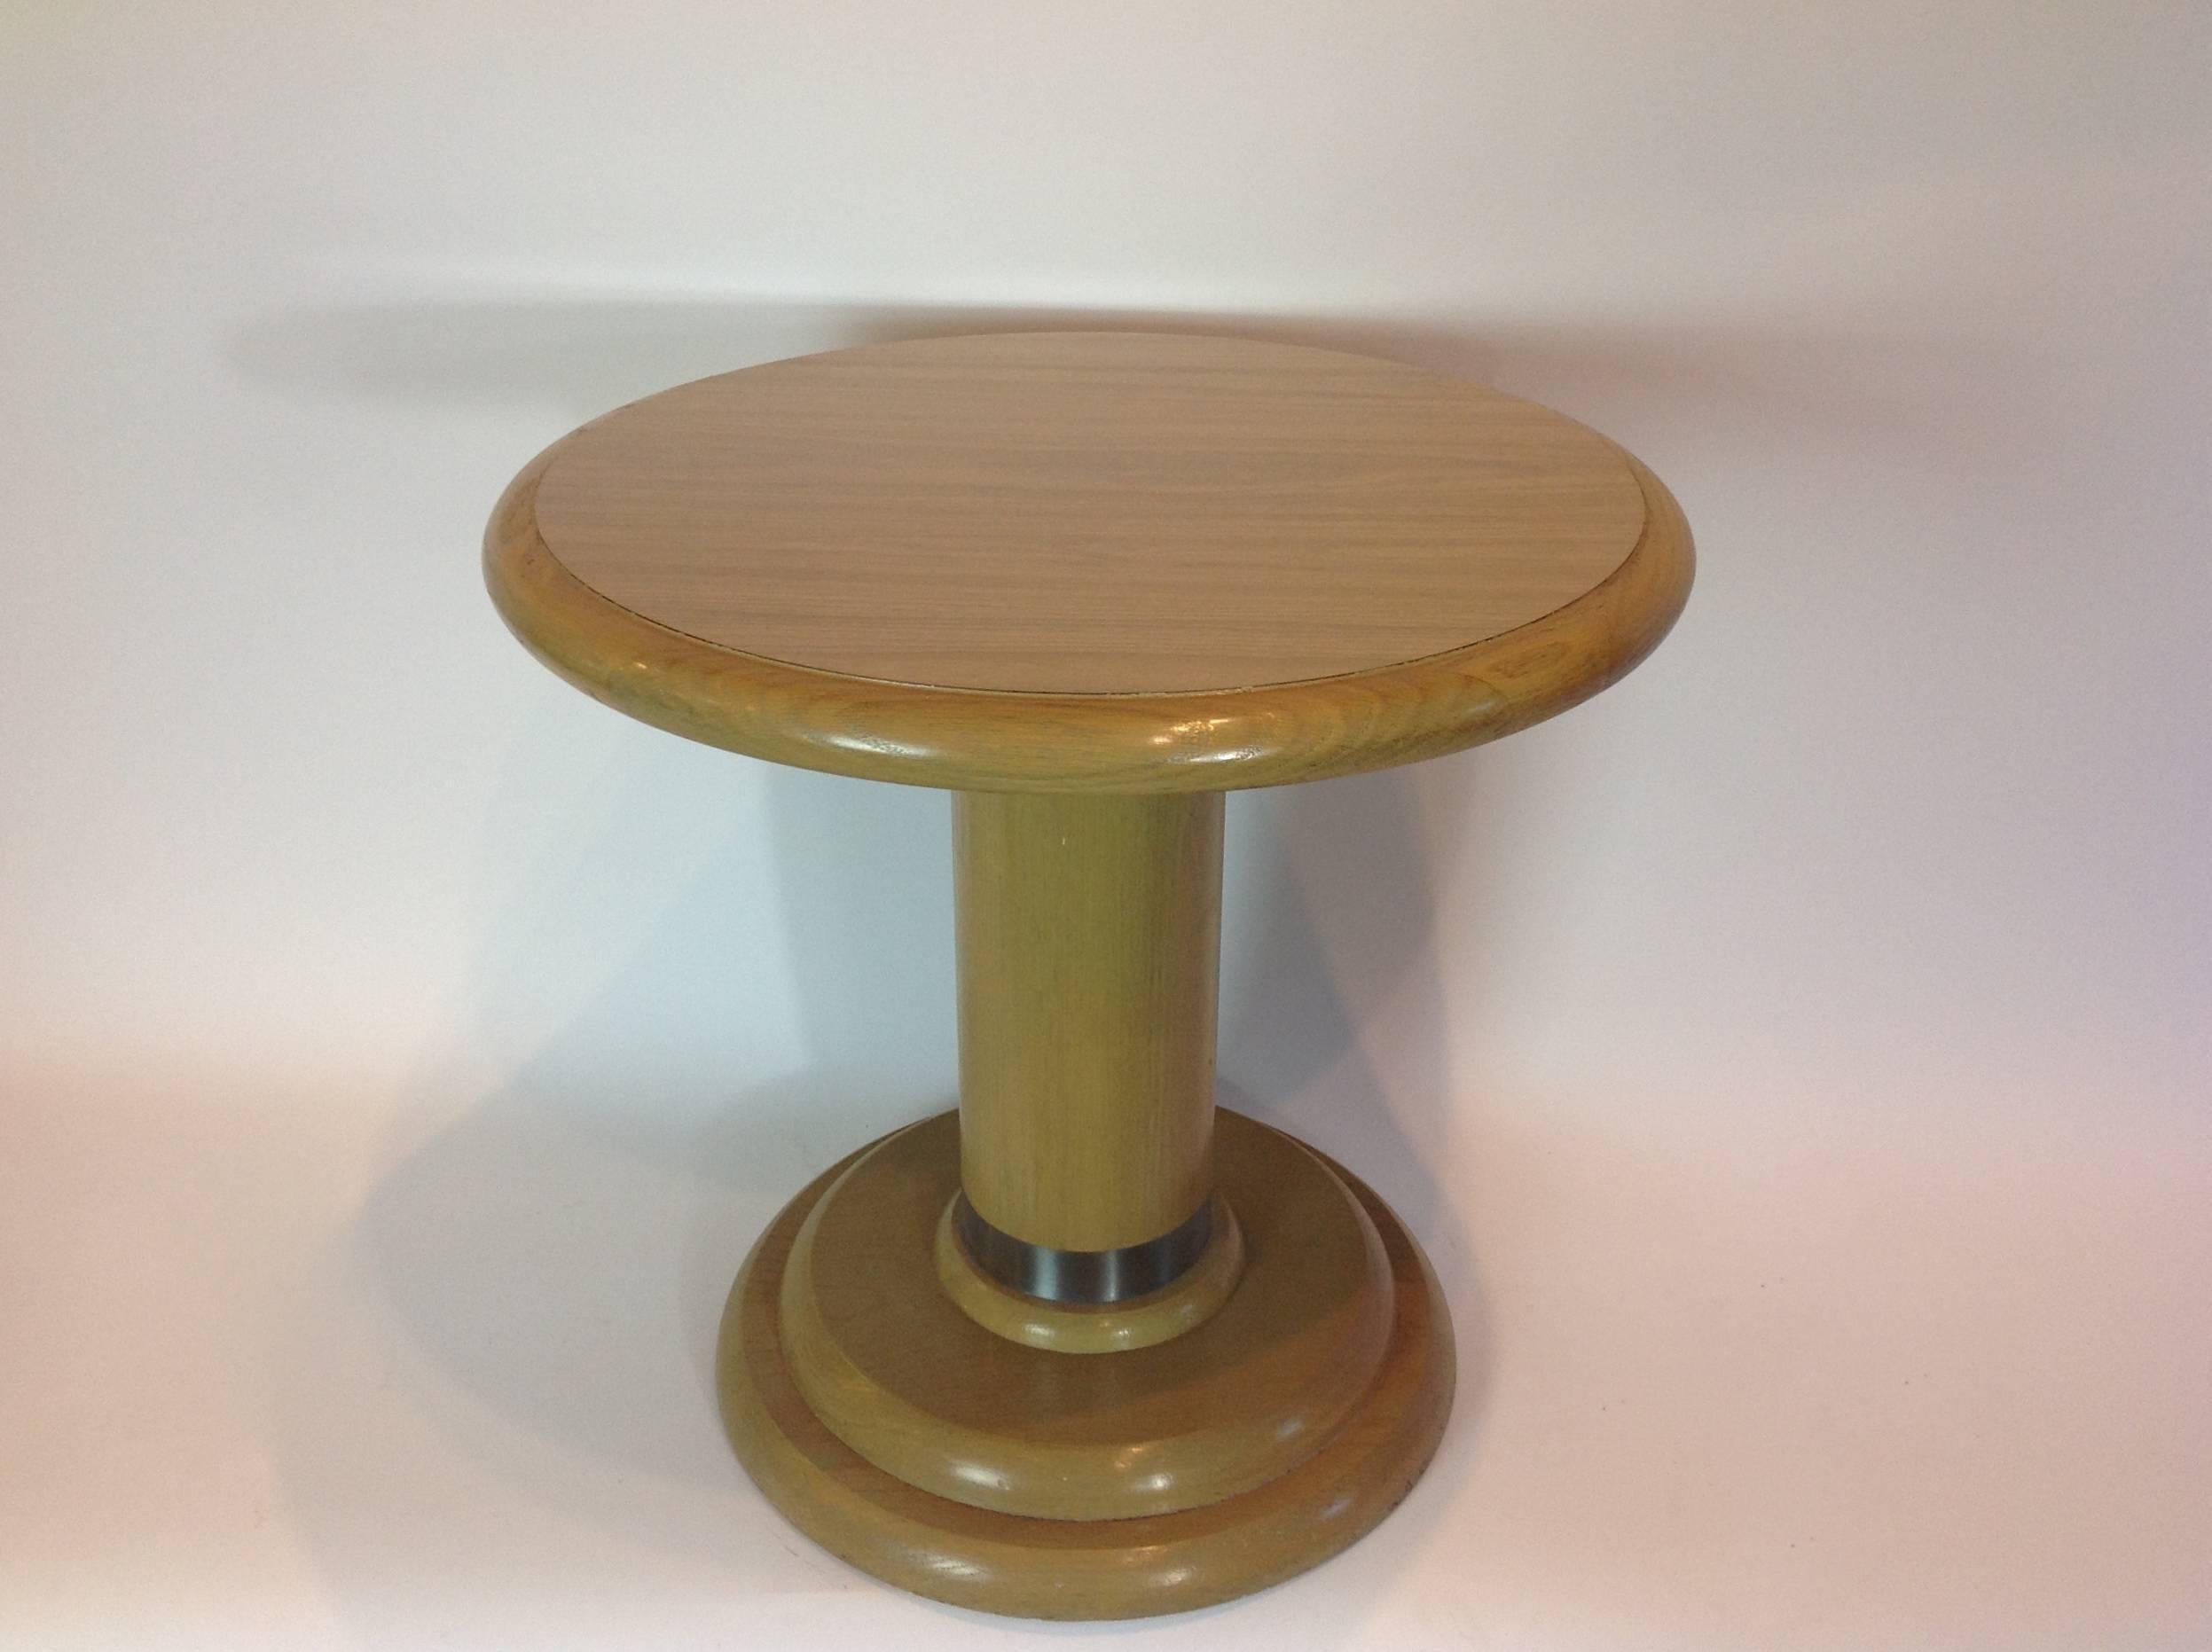 Side table fashioned in the Art Deco style with steel banding, wood, and a laminate top.